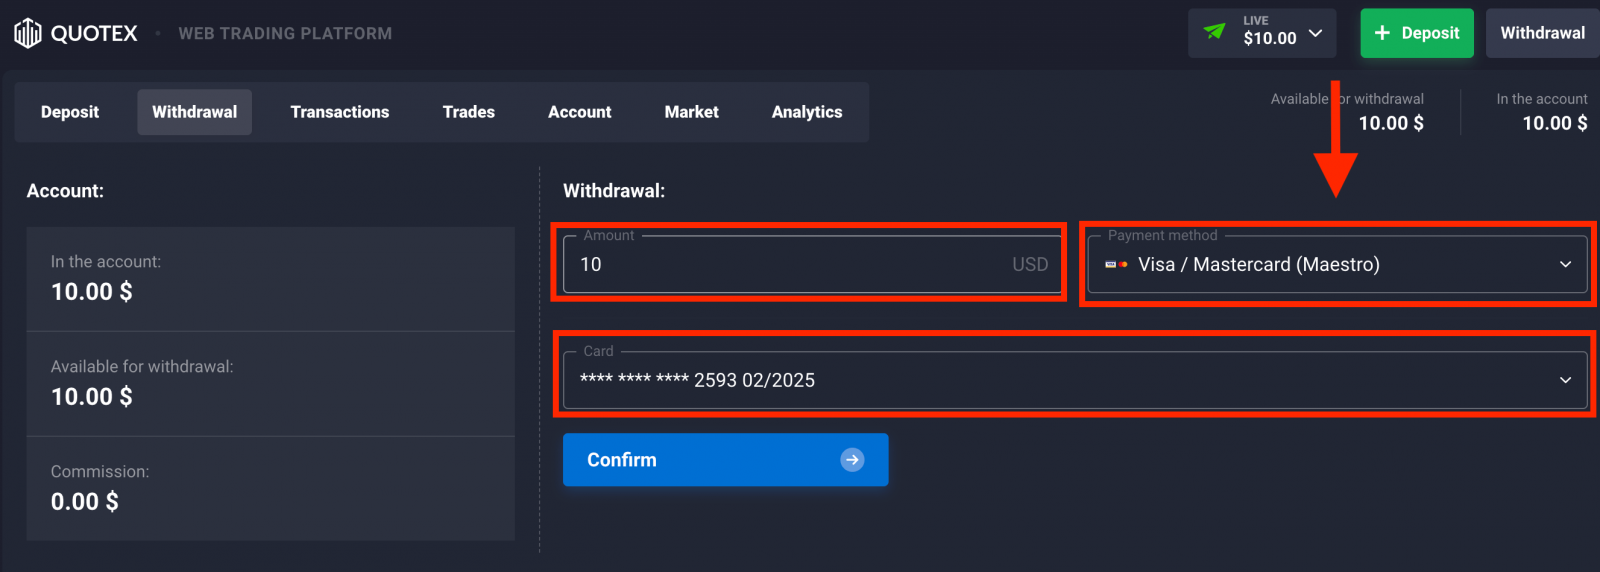 How to Open Account and Withdraw Money at Quotex